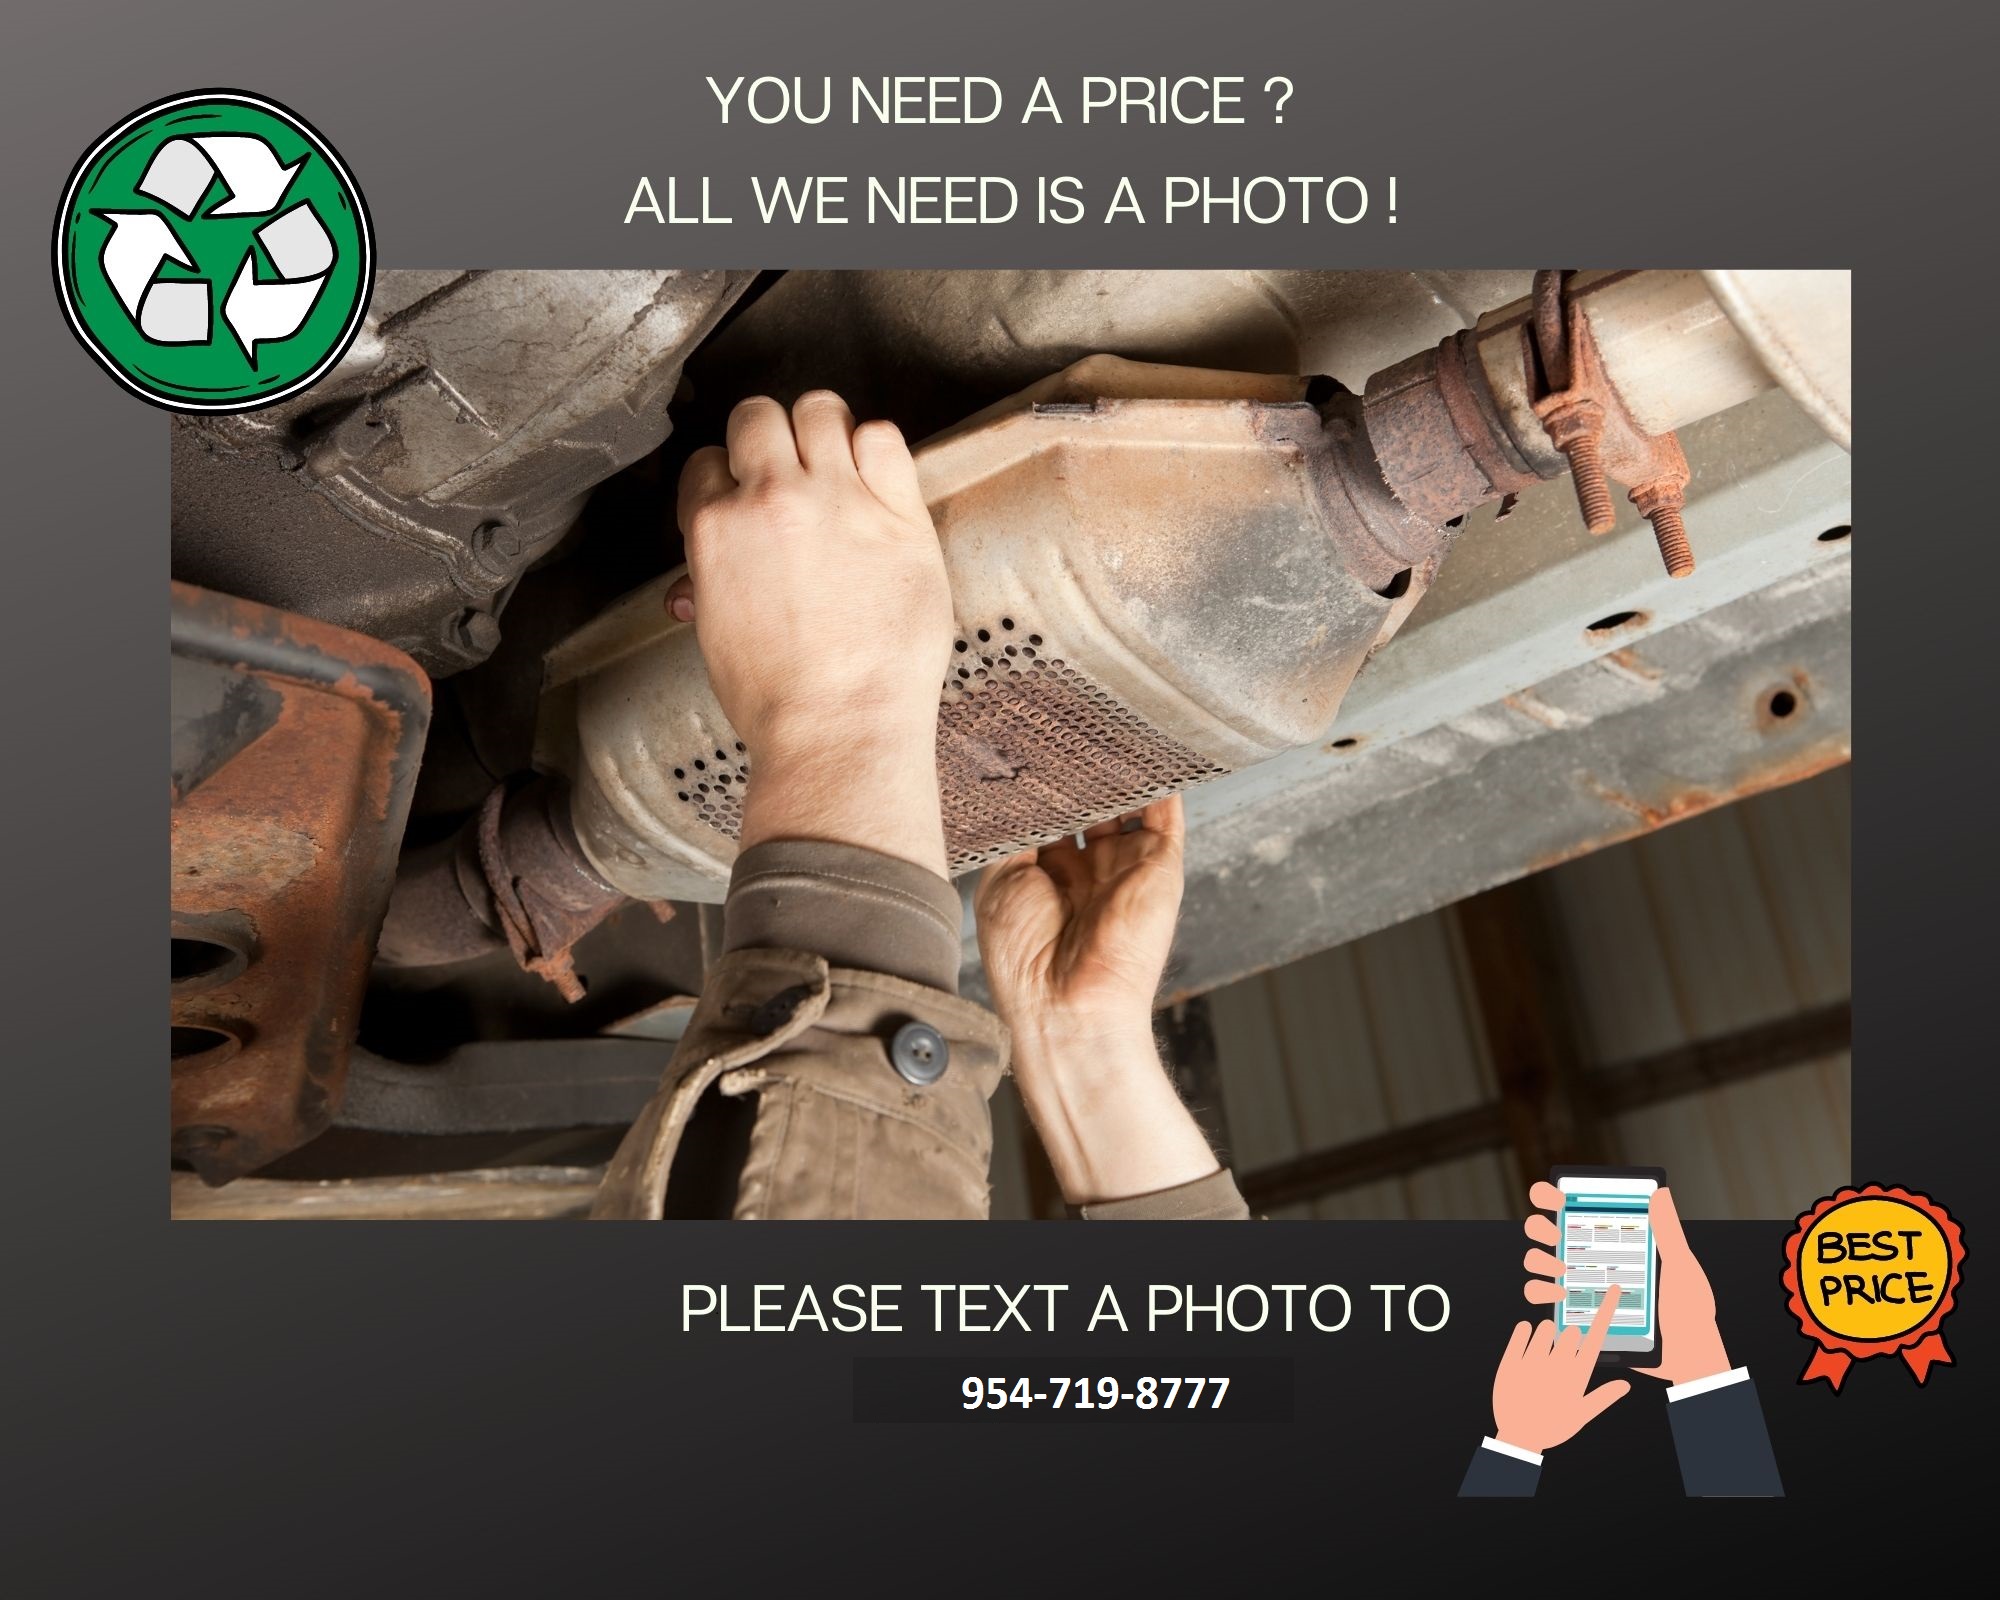 Send us a photo to get a quote for your scrap converter